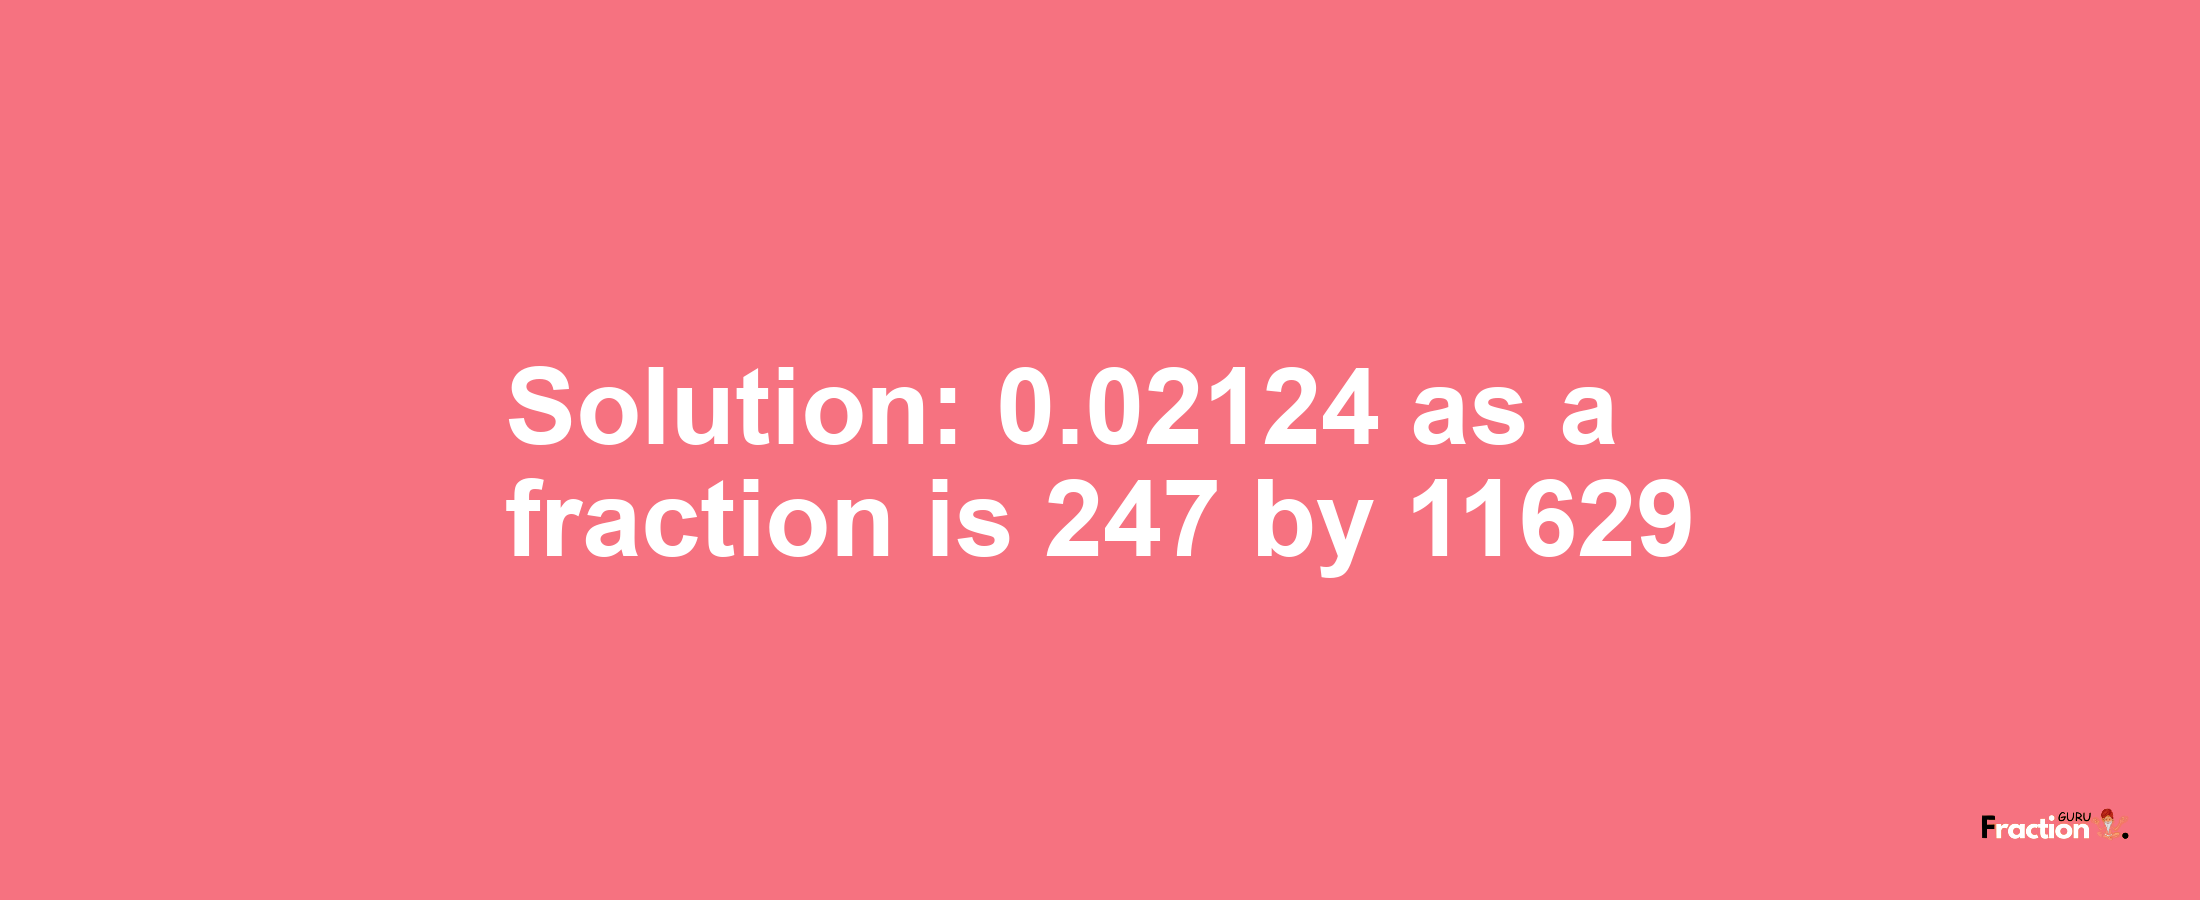 Solution:0.02124 as a fraction is 247/11629